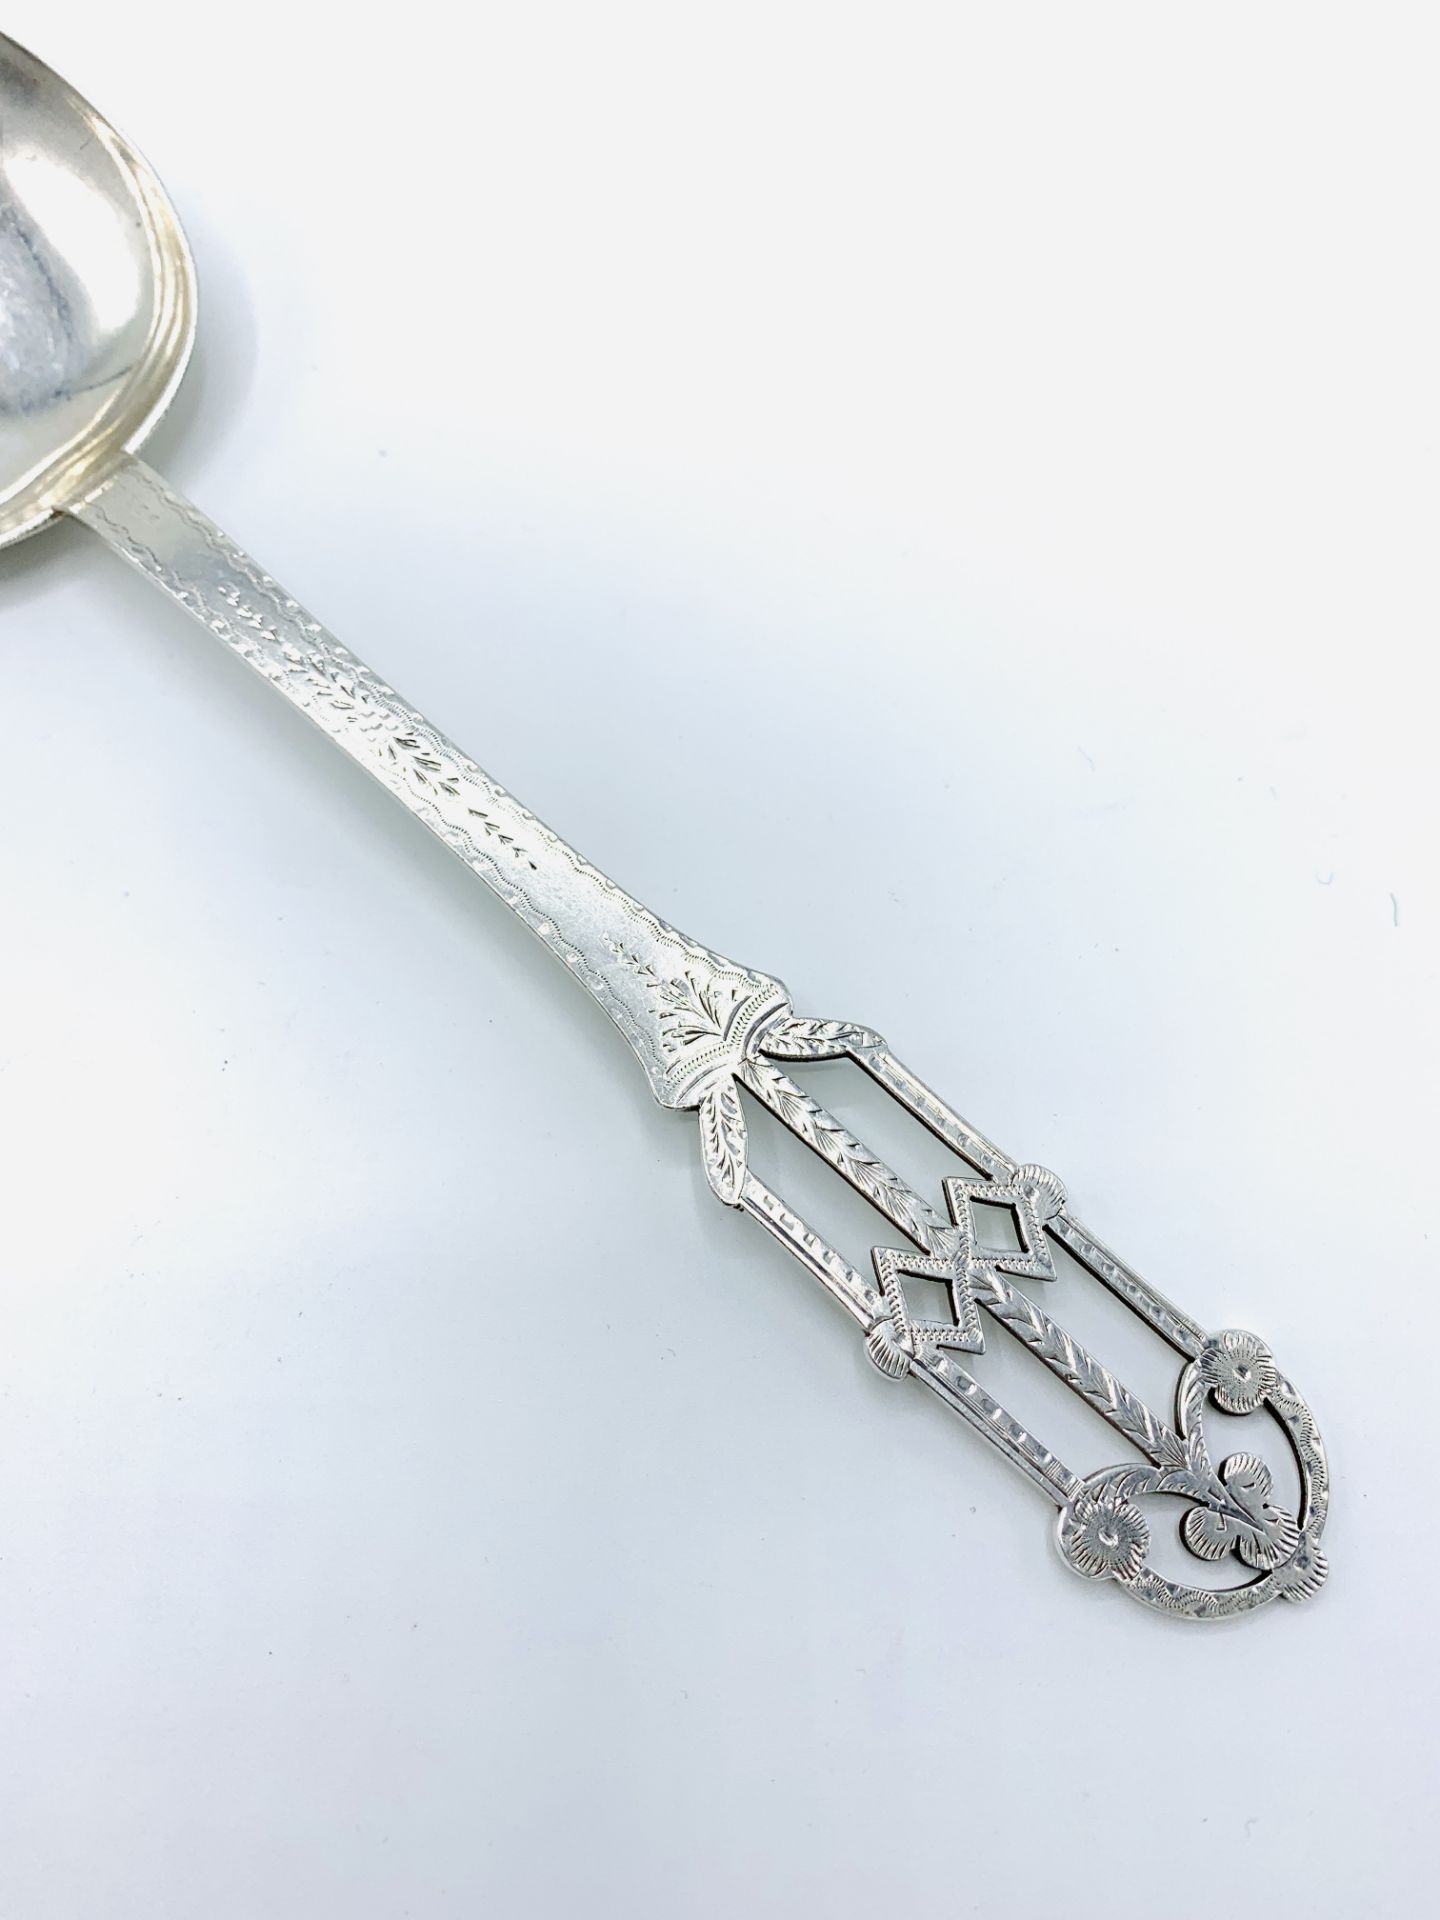 Hand pierced and engraved arts and crafts serving spoon. - Image 2 of 4